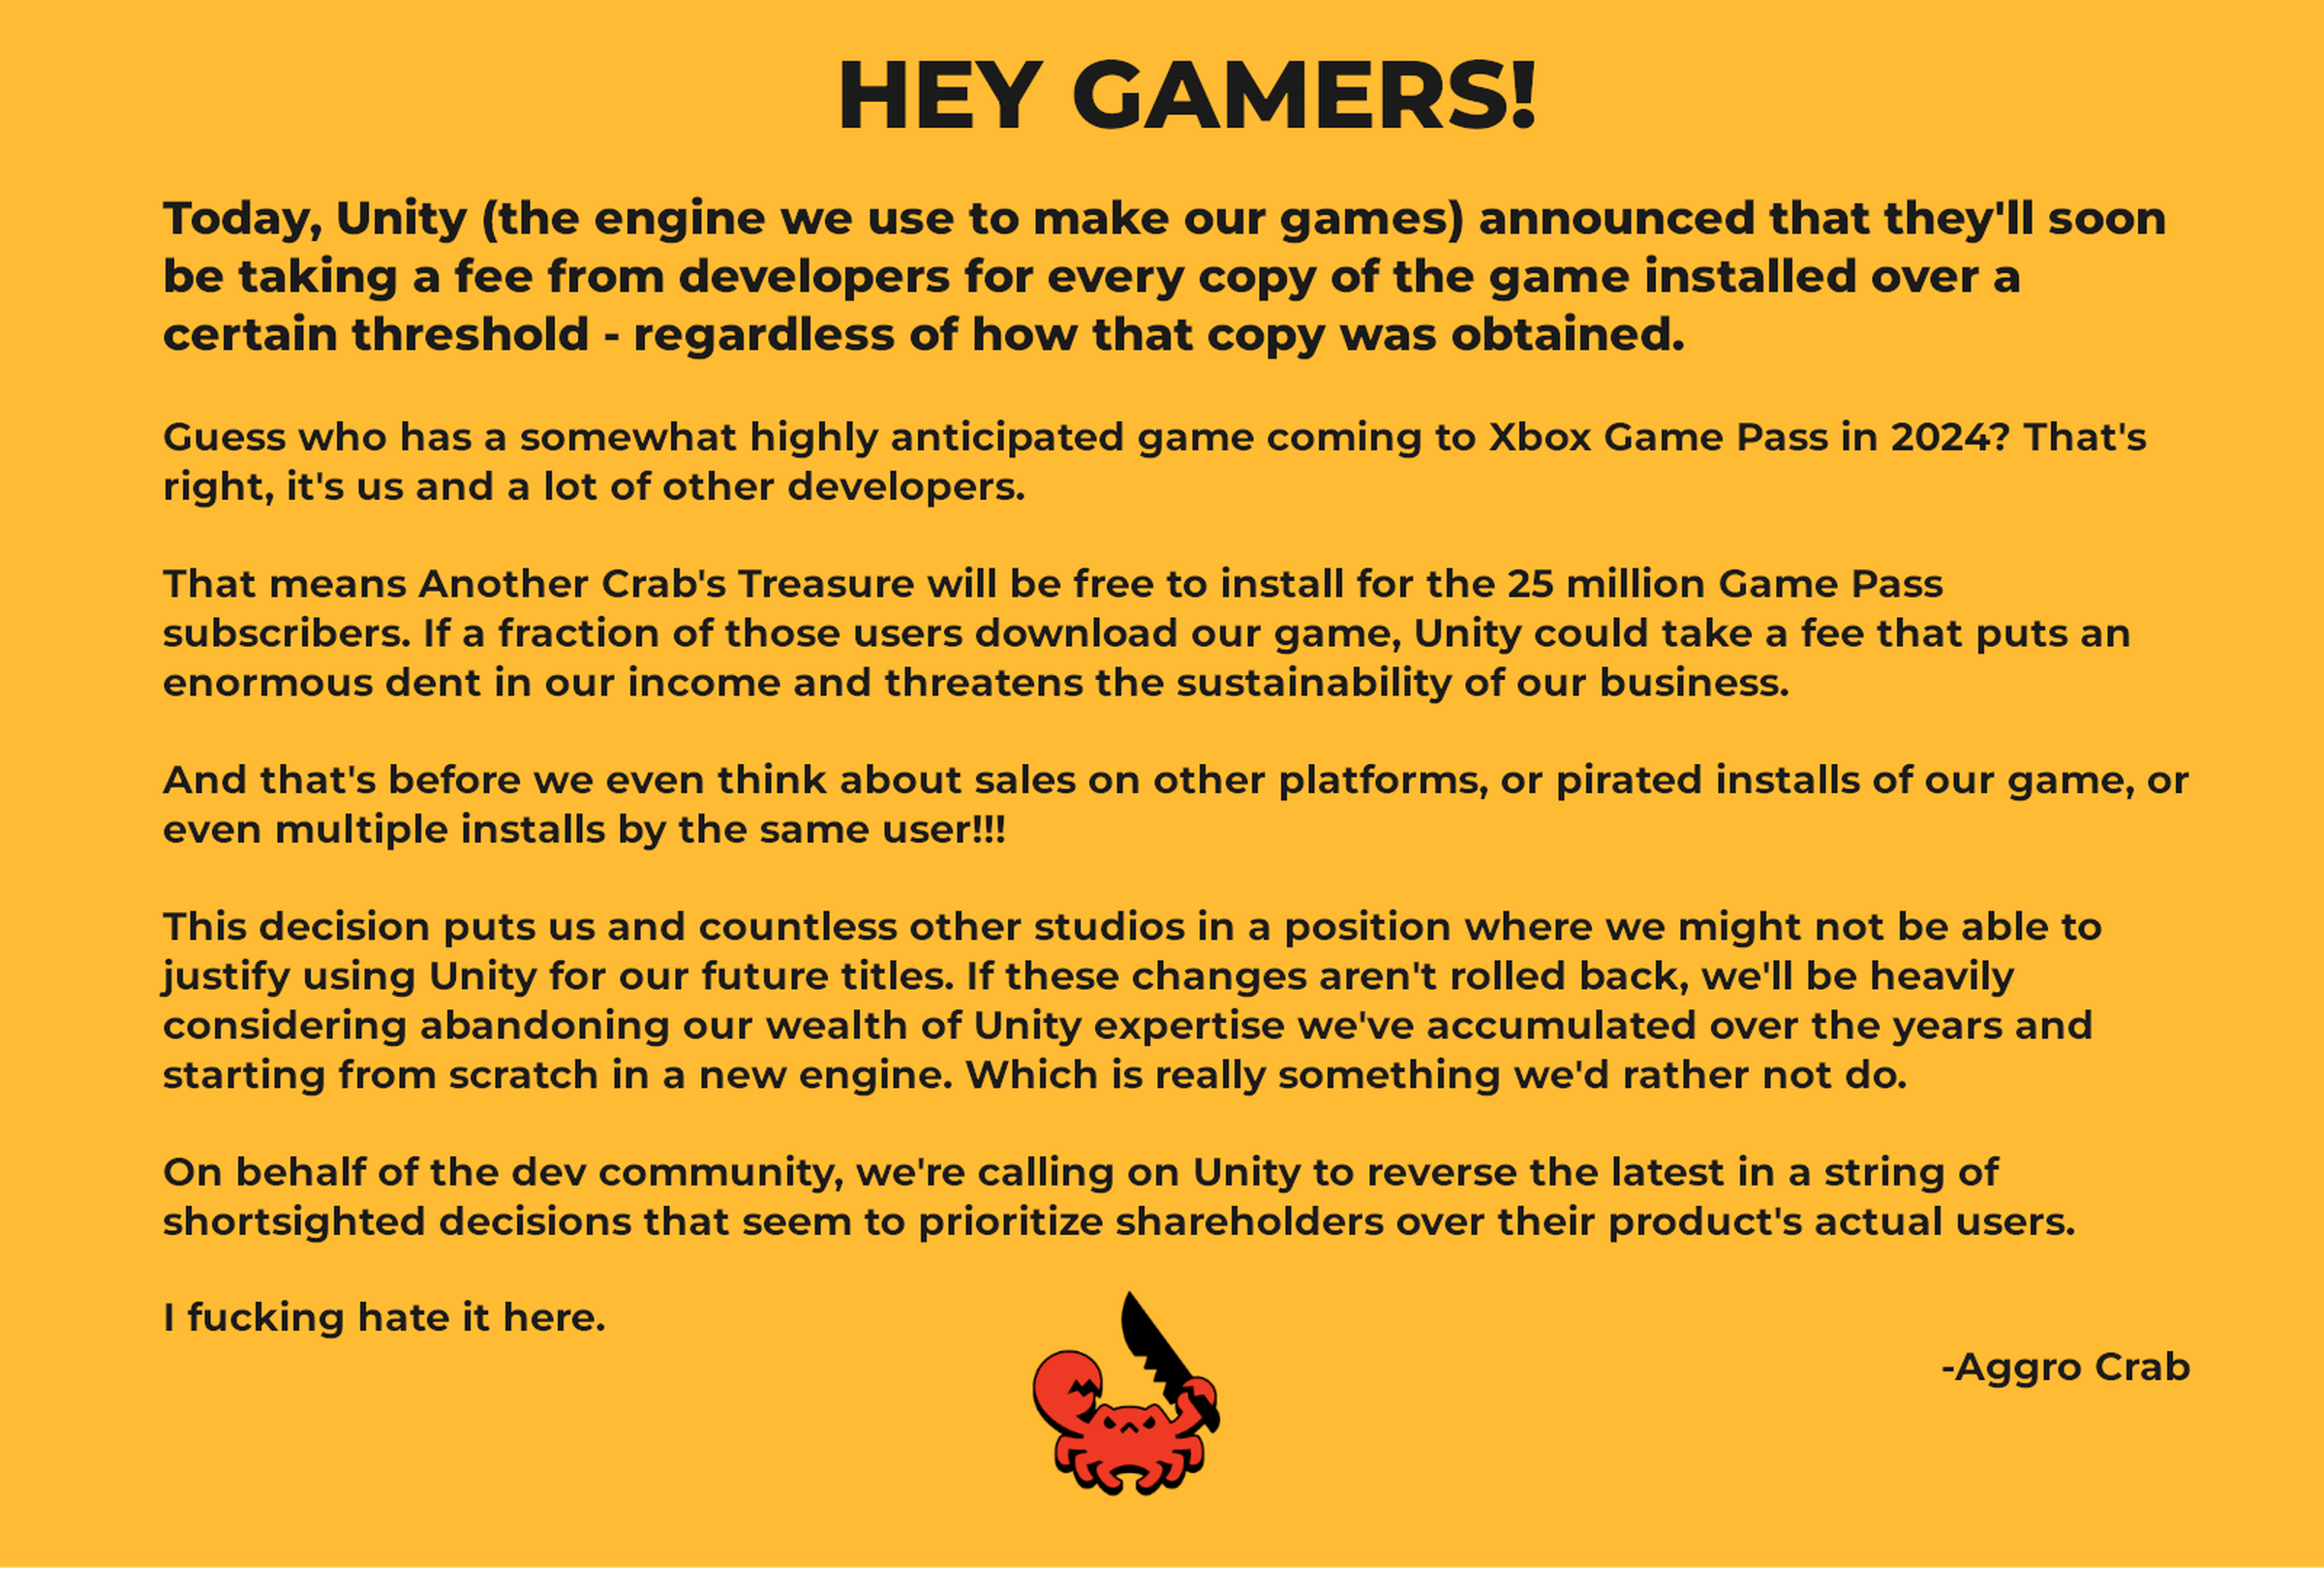 Image of statement from Aggro Crab with the text: Unity announced that they’ll soon be taking a fee from developers for every copy of the game installed over a certain threshold - regardless of how that copy was obtained. We and a lot of other developers have a highly anticipated game coming to Xbox Game Pass in 2024. Another Crab’s Treasure will be free to install for the 25 million Game Pass subscribers. Unity could take a fee that puts an enormous dent in our income and threatens our business